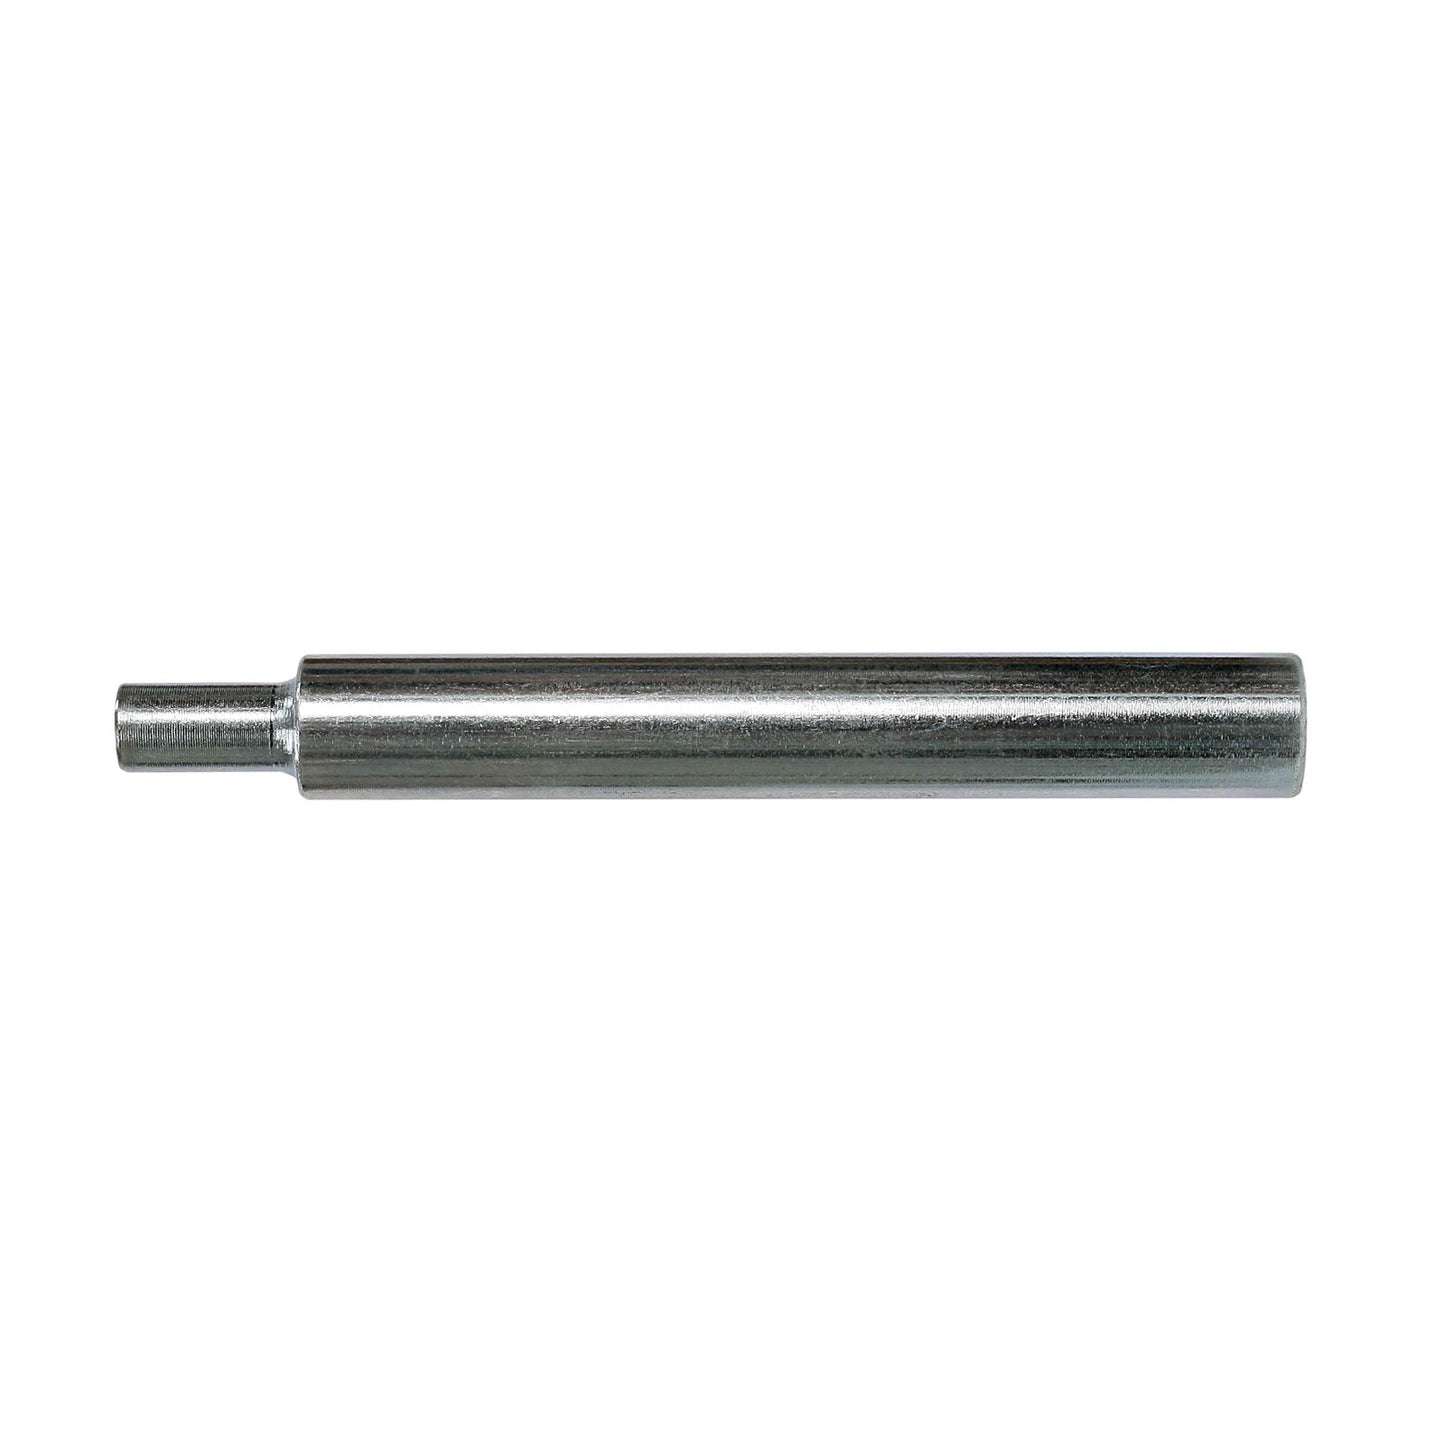 1/4" Strong-Tie Drop-In Internally Threaded Anchor Hand Setting Tool - Pkg 1